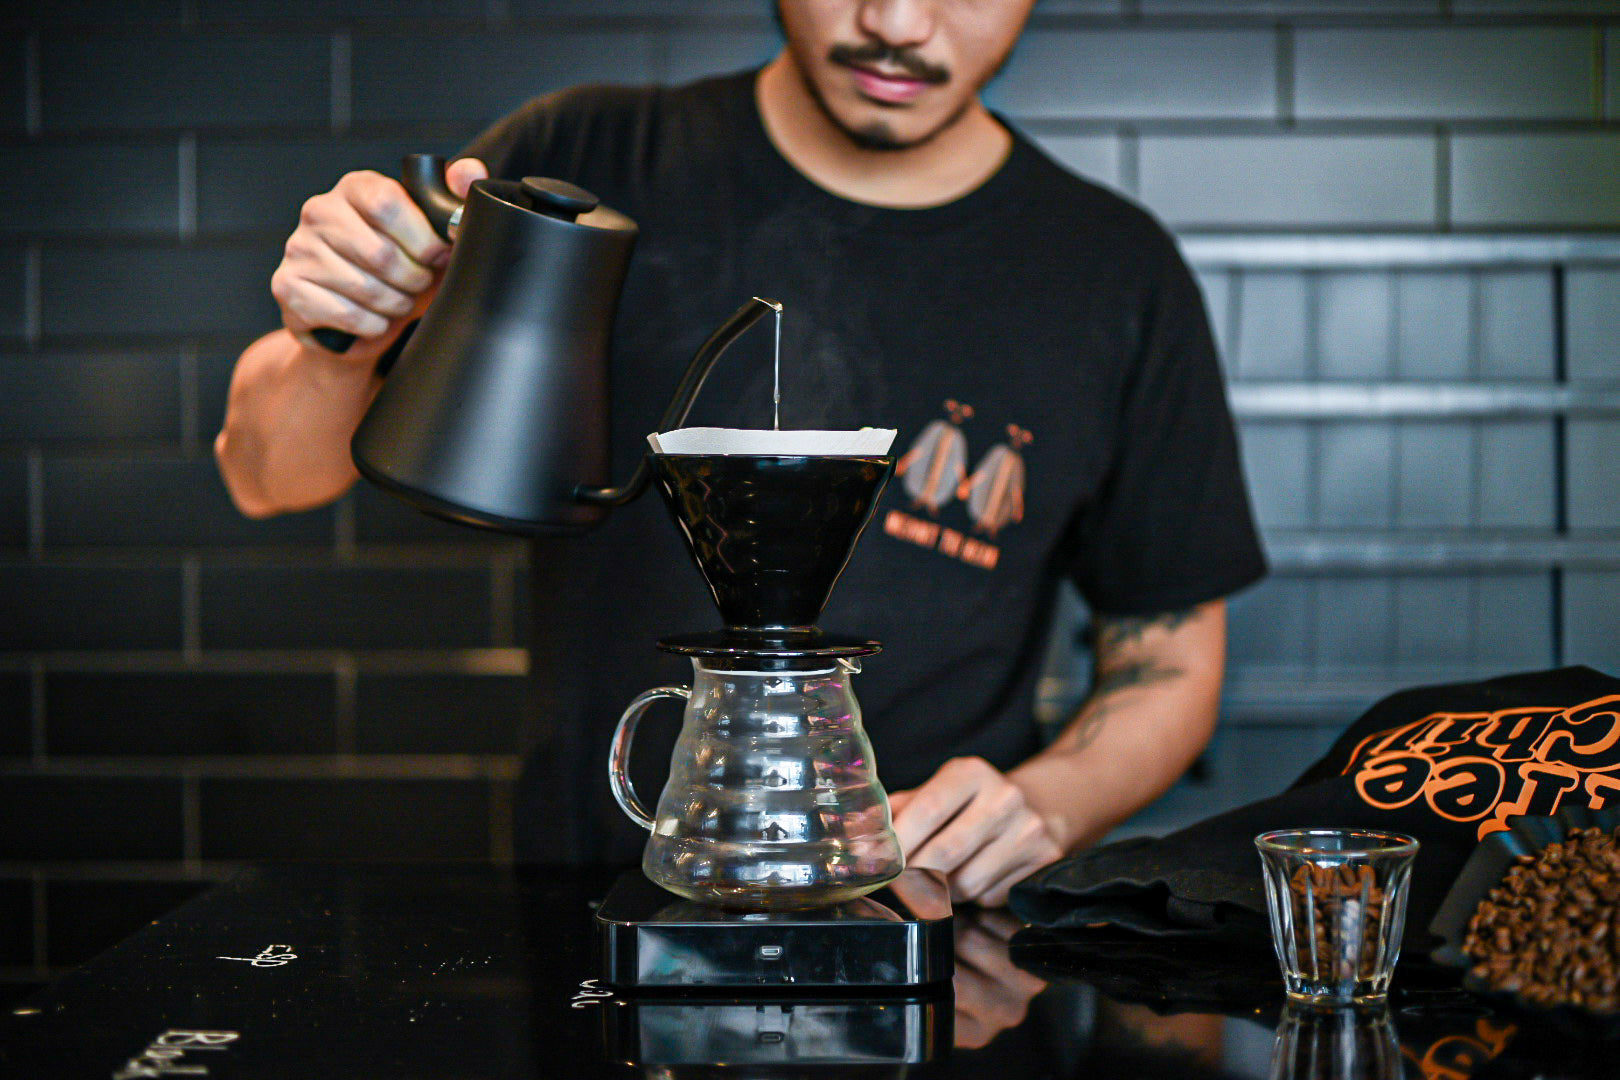 Fellow Stagg EKG (Electric Pour Over Kettle)